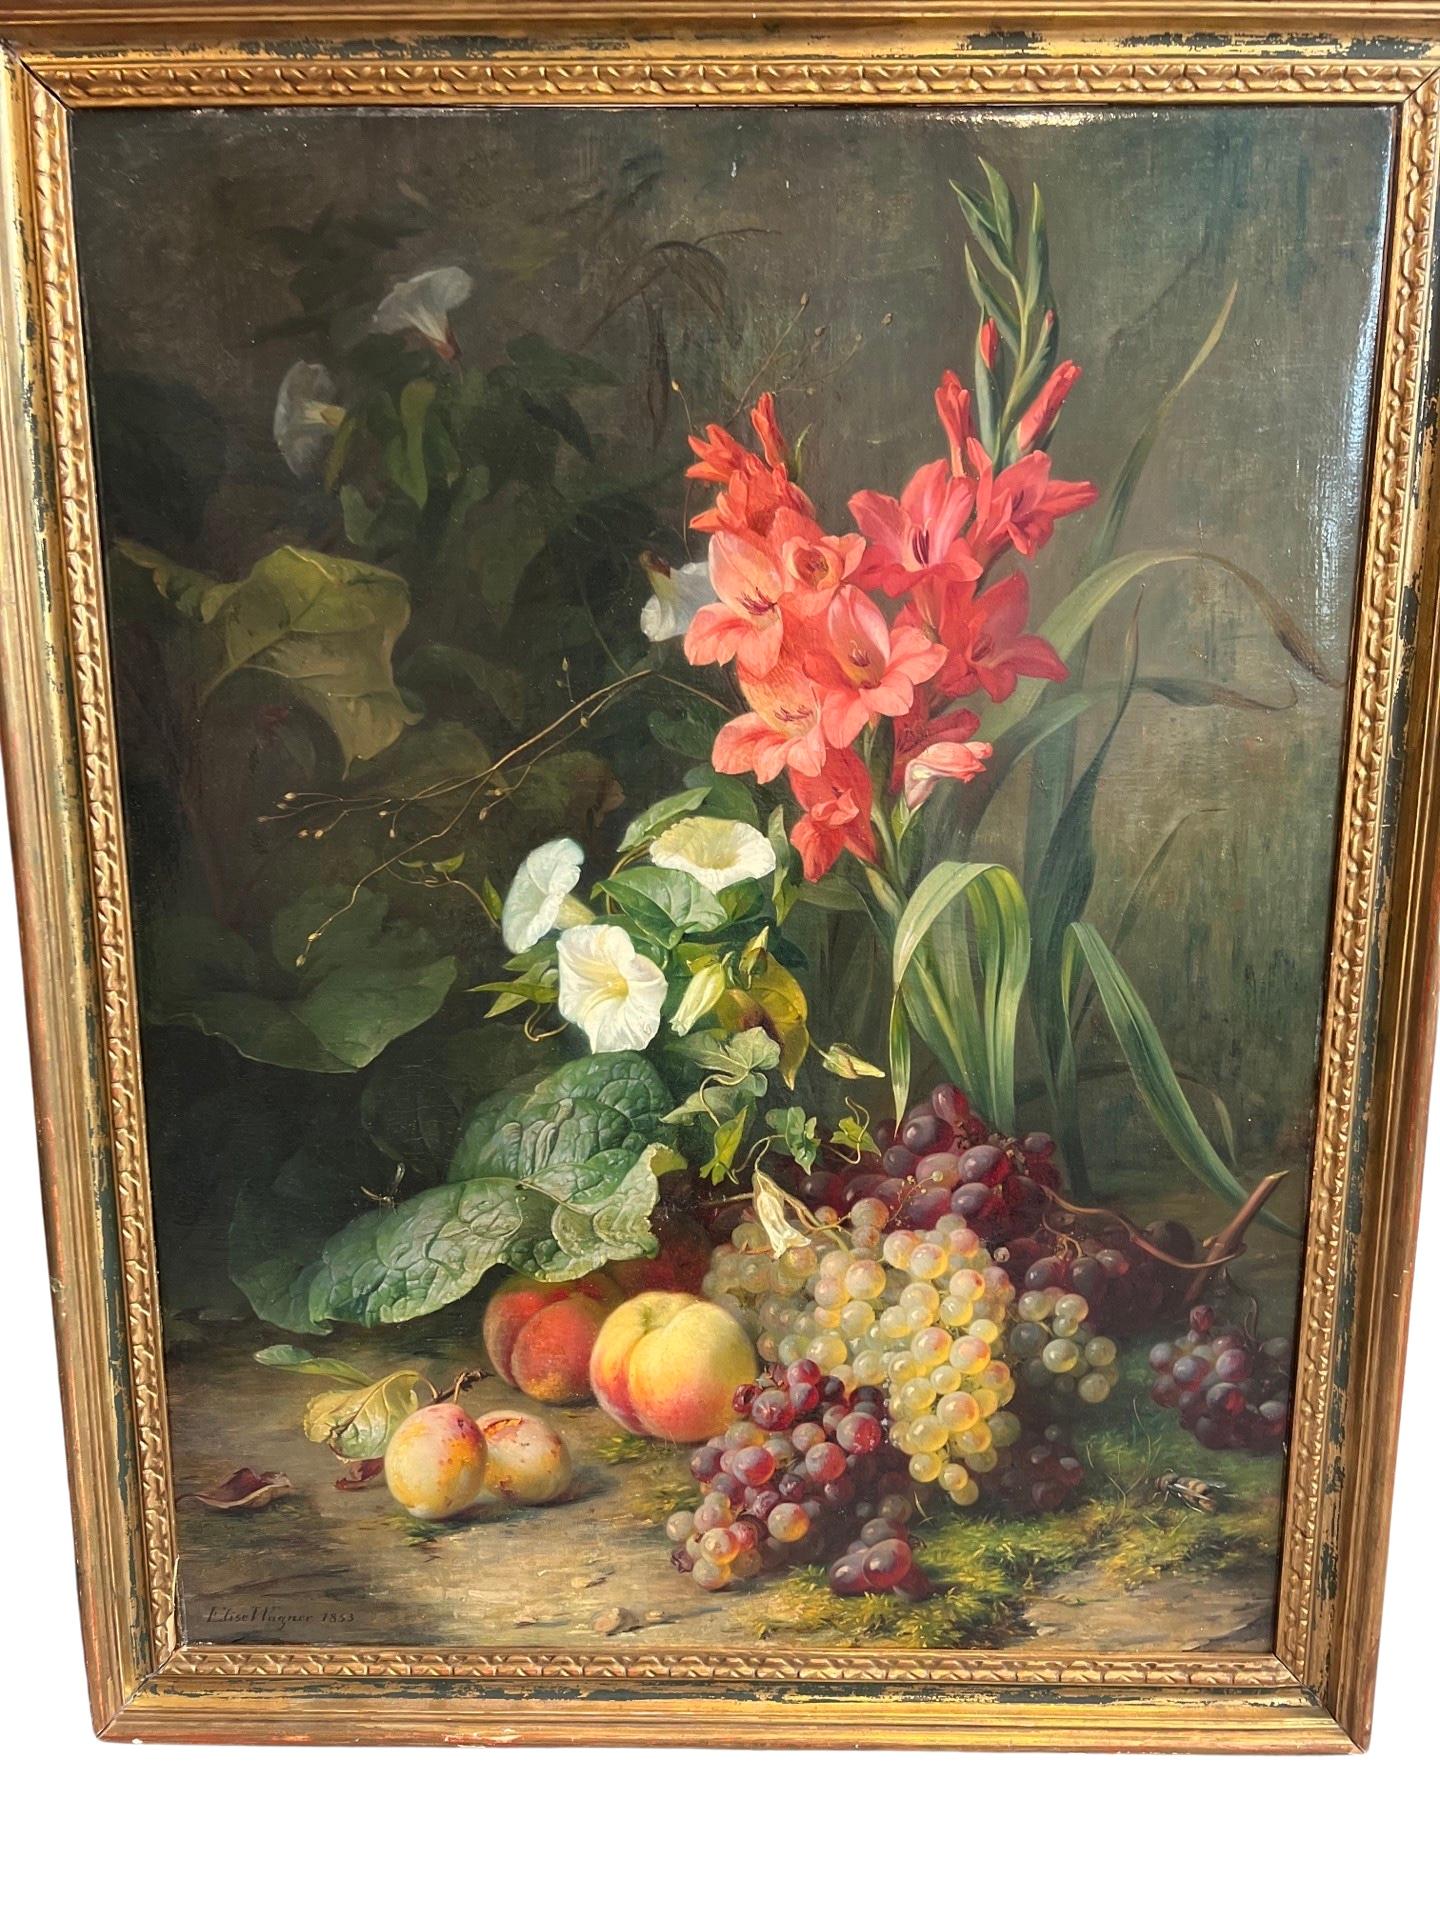 Elise Puyroche-Wagner (German, 1828-1895), Floral Naturalistic Painting C. 1853 In Good Condition For Sale In Atlanta, GA